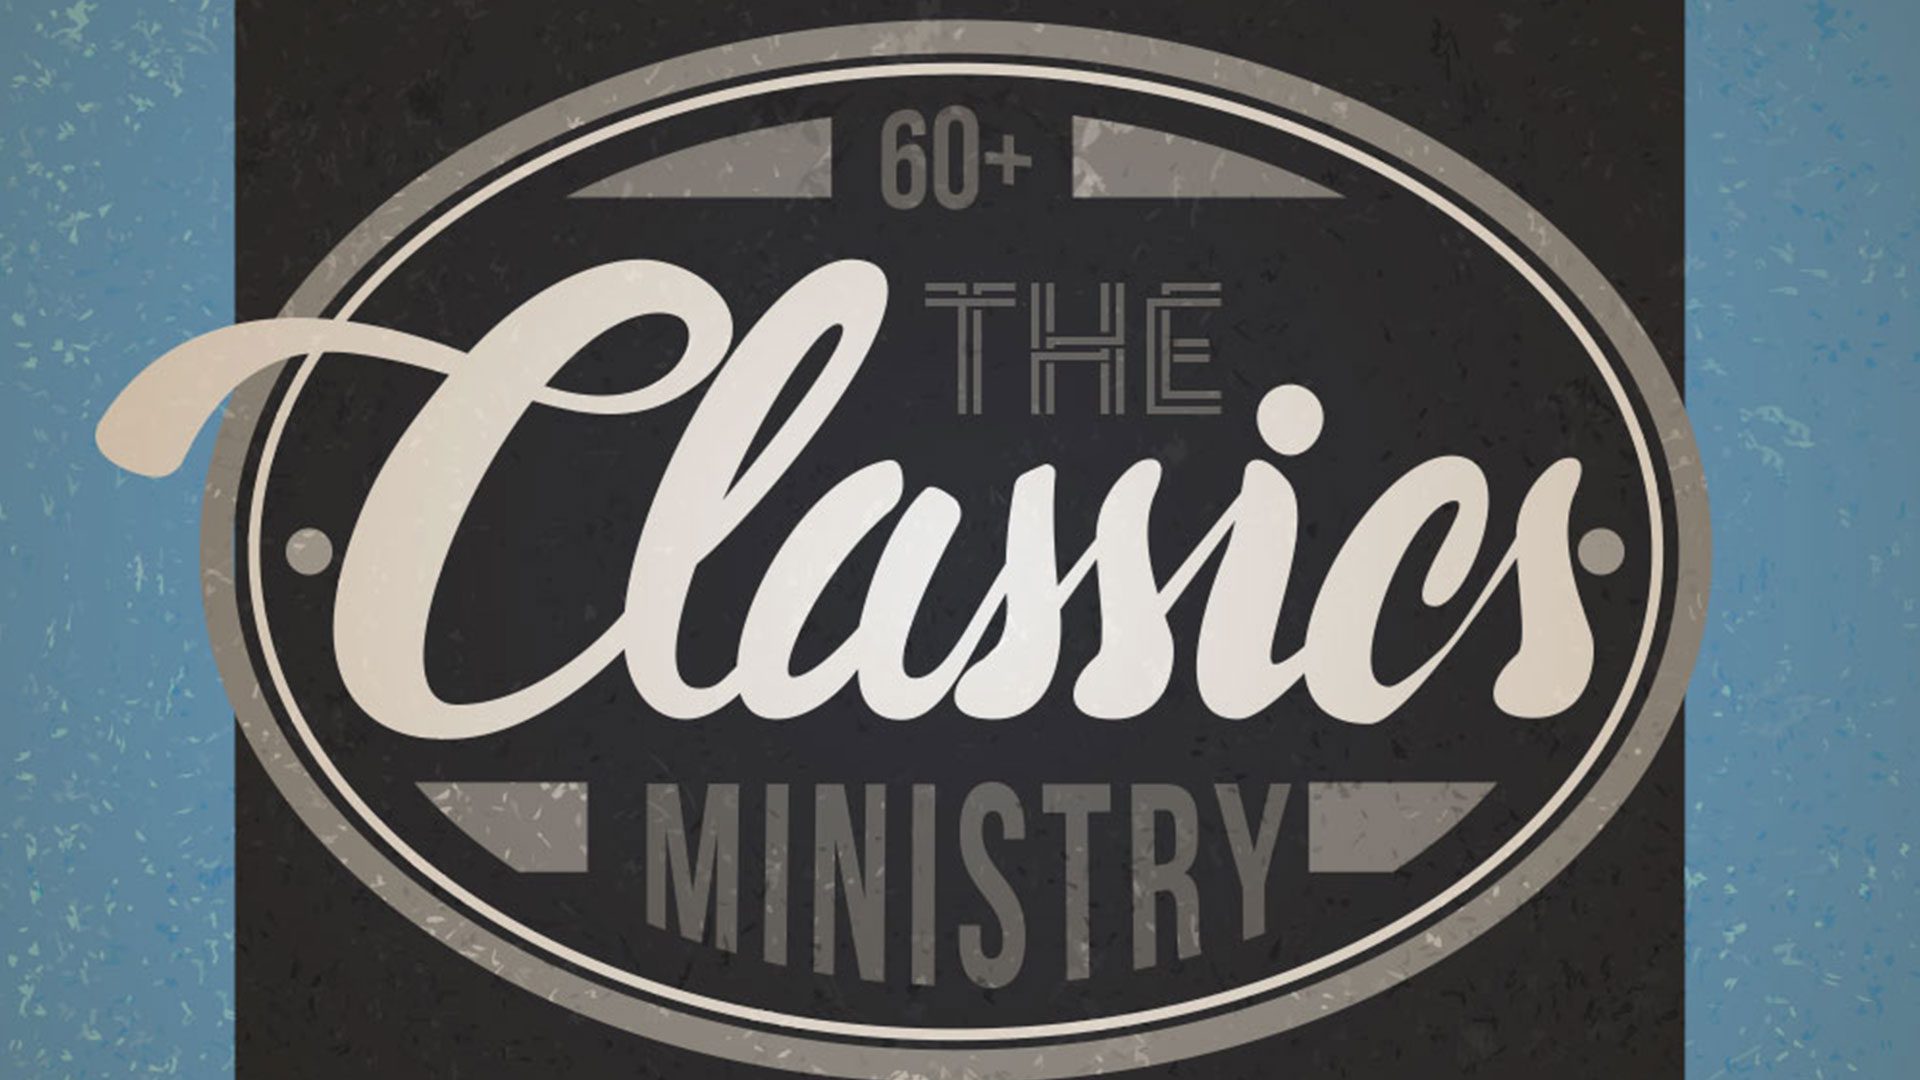 The Classics Ministry for 60+